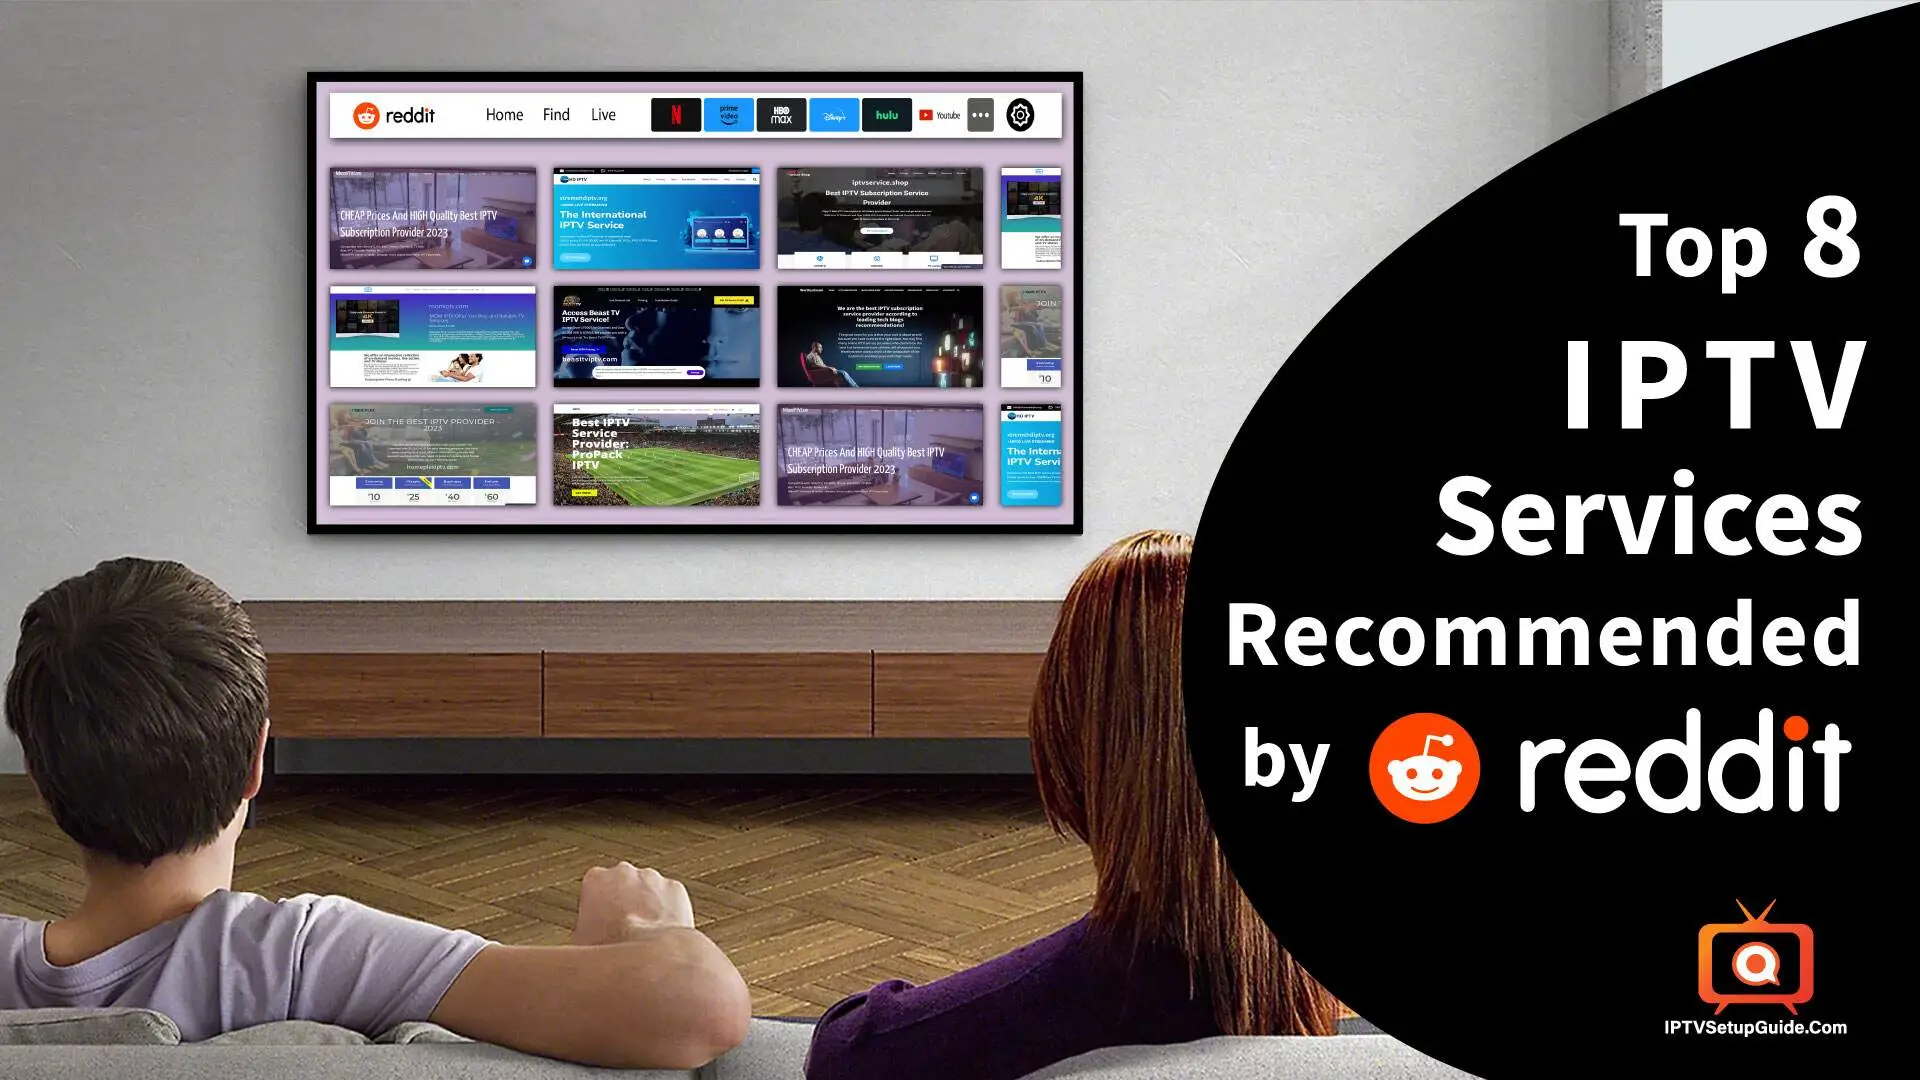 IPTV Services Recommended by Reddit